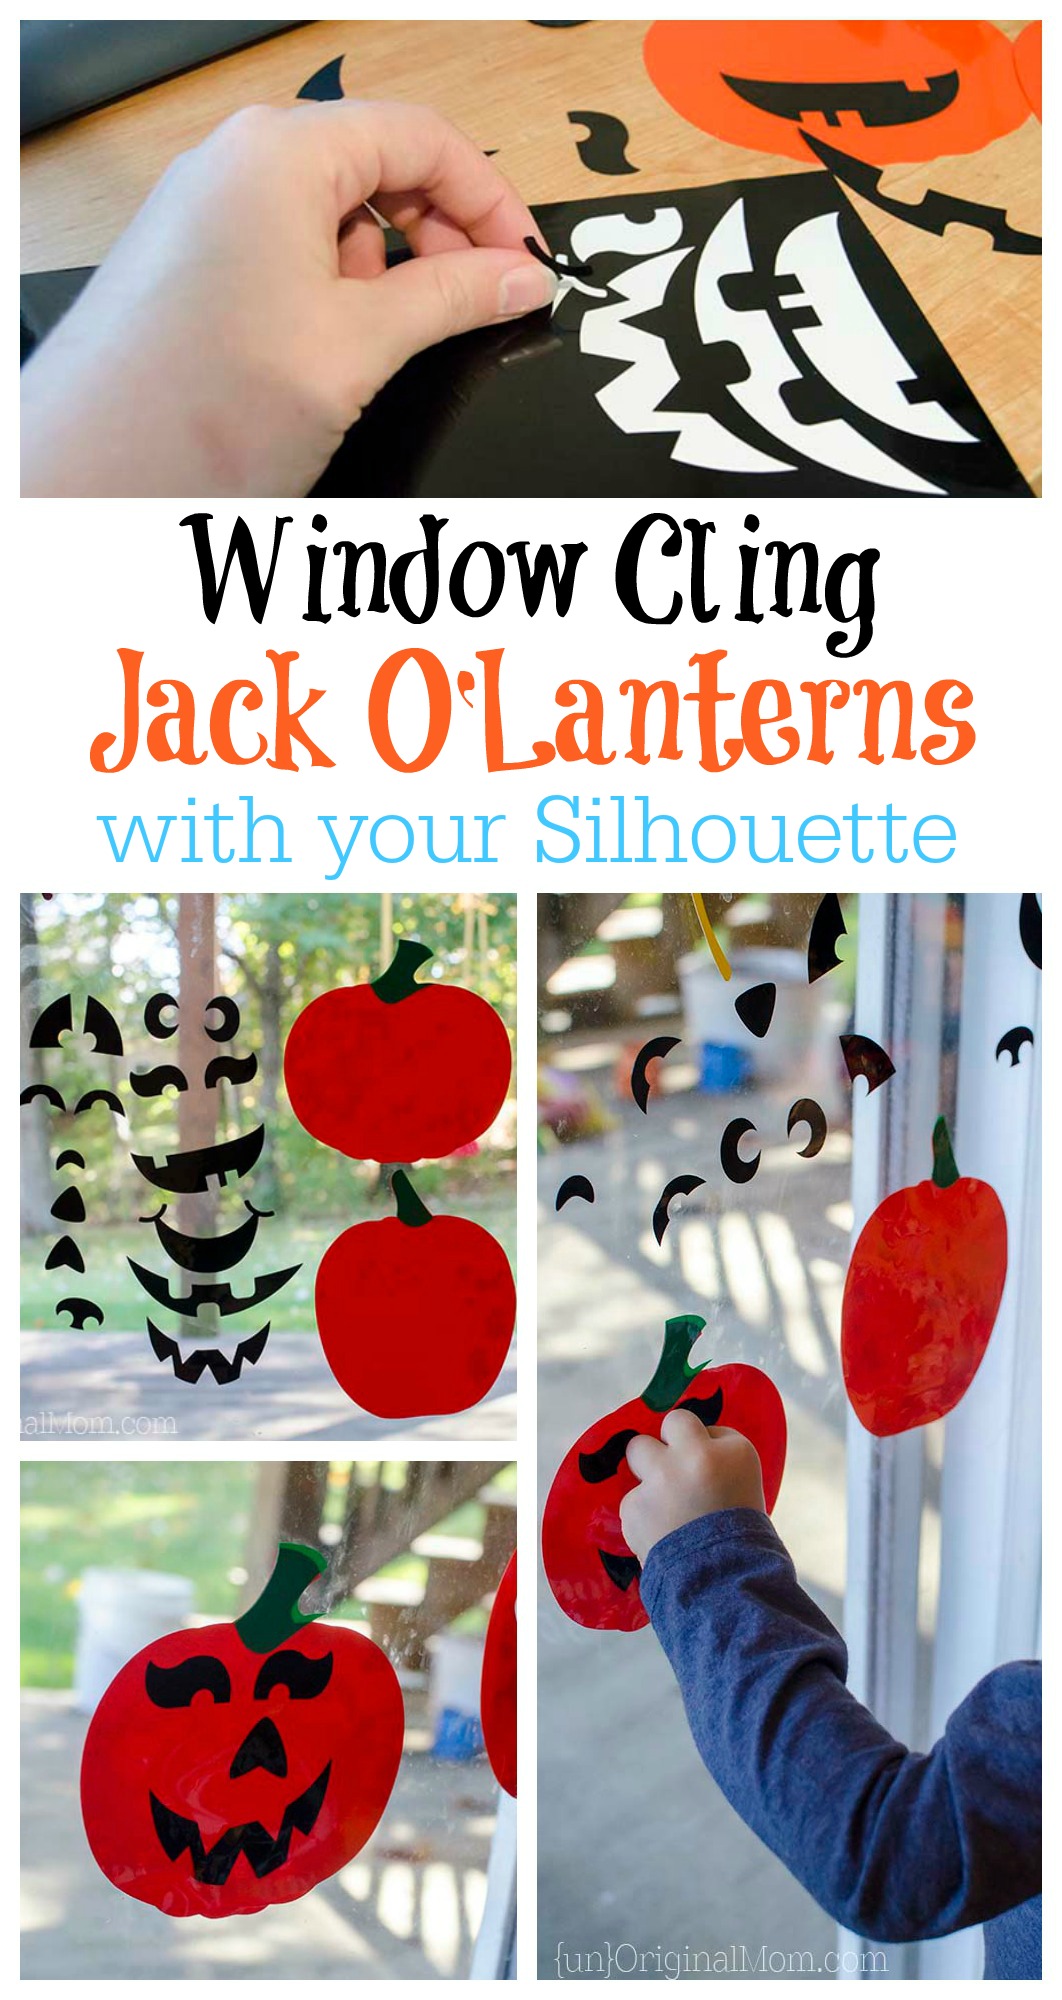 Cut window cling material with your Silhouette to make fun choose-your-own Jack o'Lanterns!